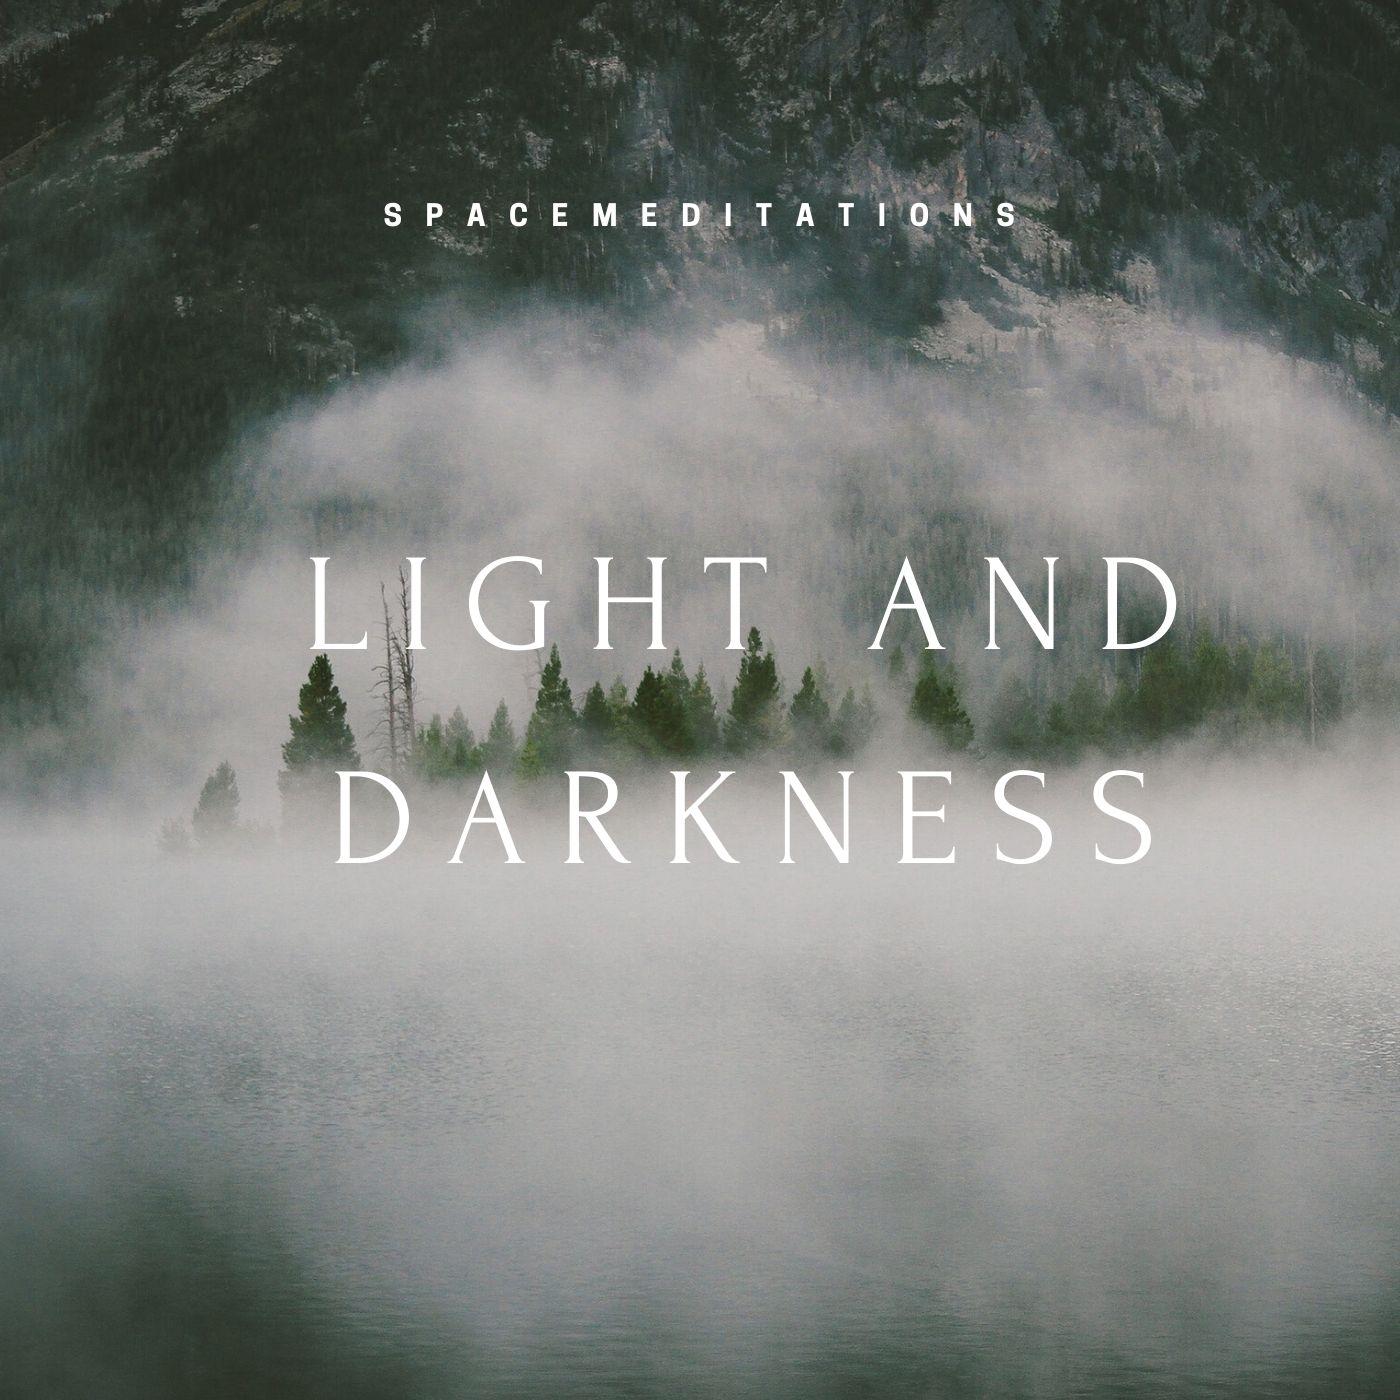 Light and darkness